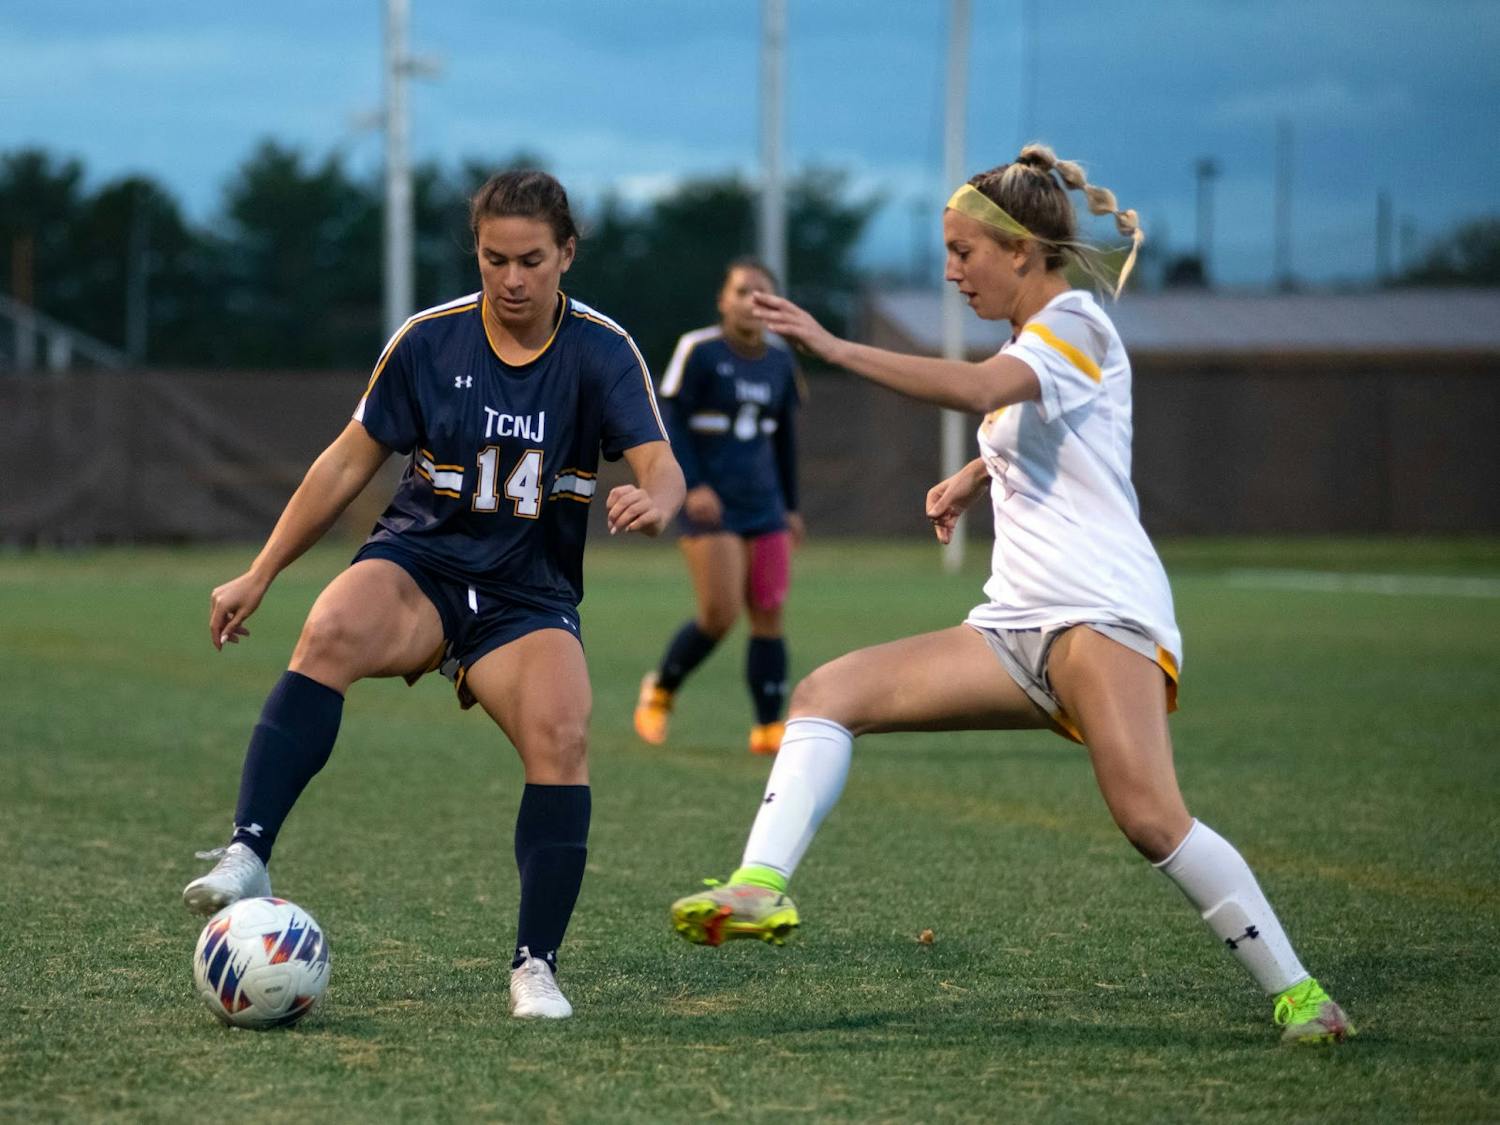 The Lions ended their season with a record of 14 wins, three losses and two ties (Photo courtesy of Jimmy Alanga, Sports Photographer for TCNJ Athletics).